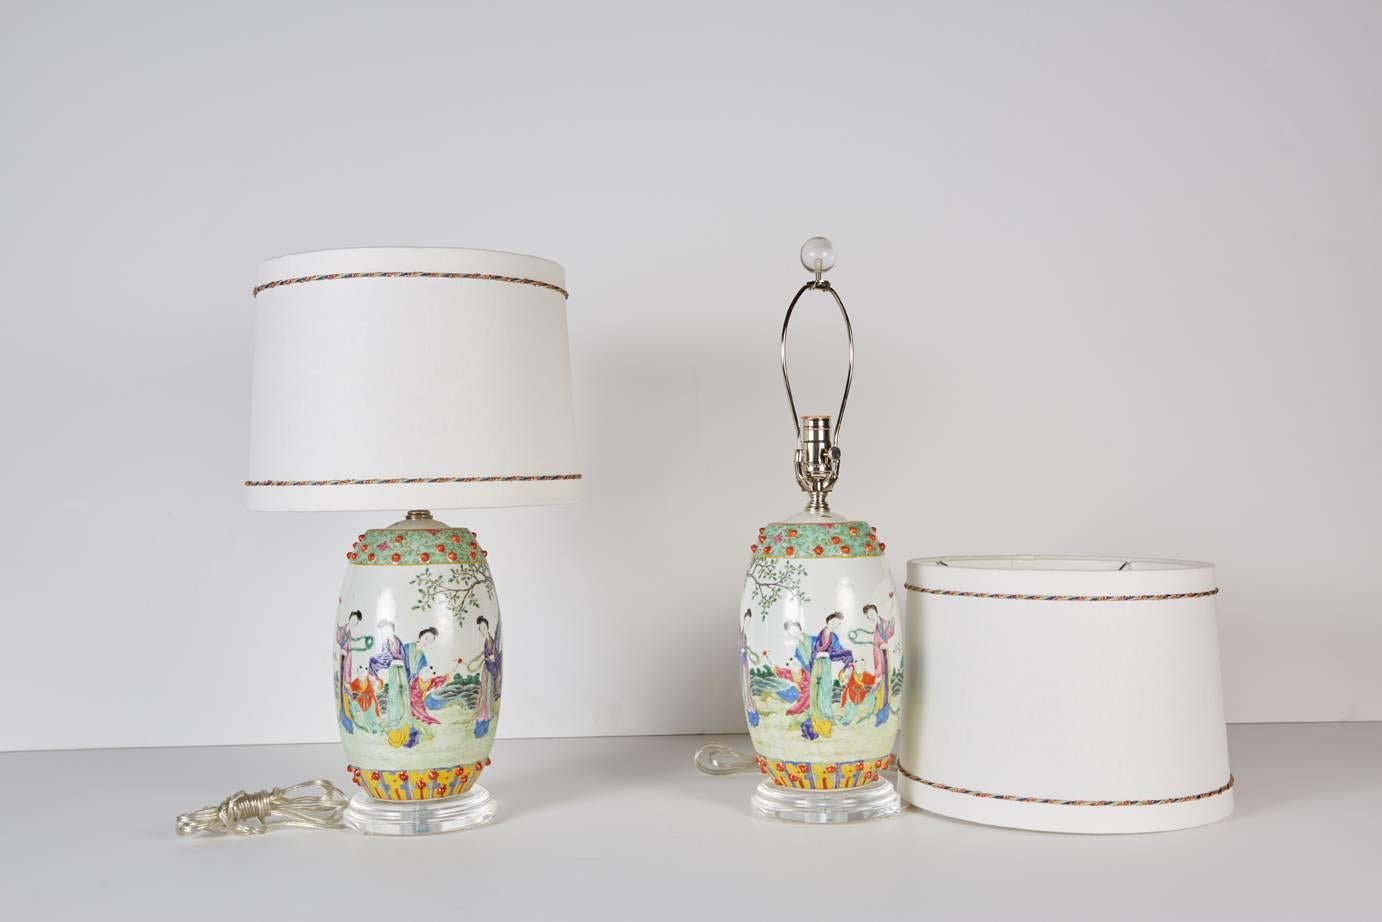 Chinese Export Pair of Chinese Drum Shaped Decorative Porcelains Custom Mounted as Lamps